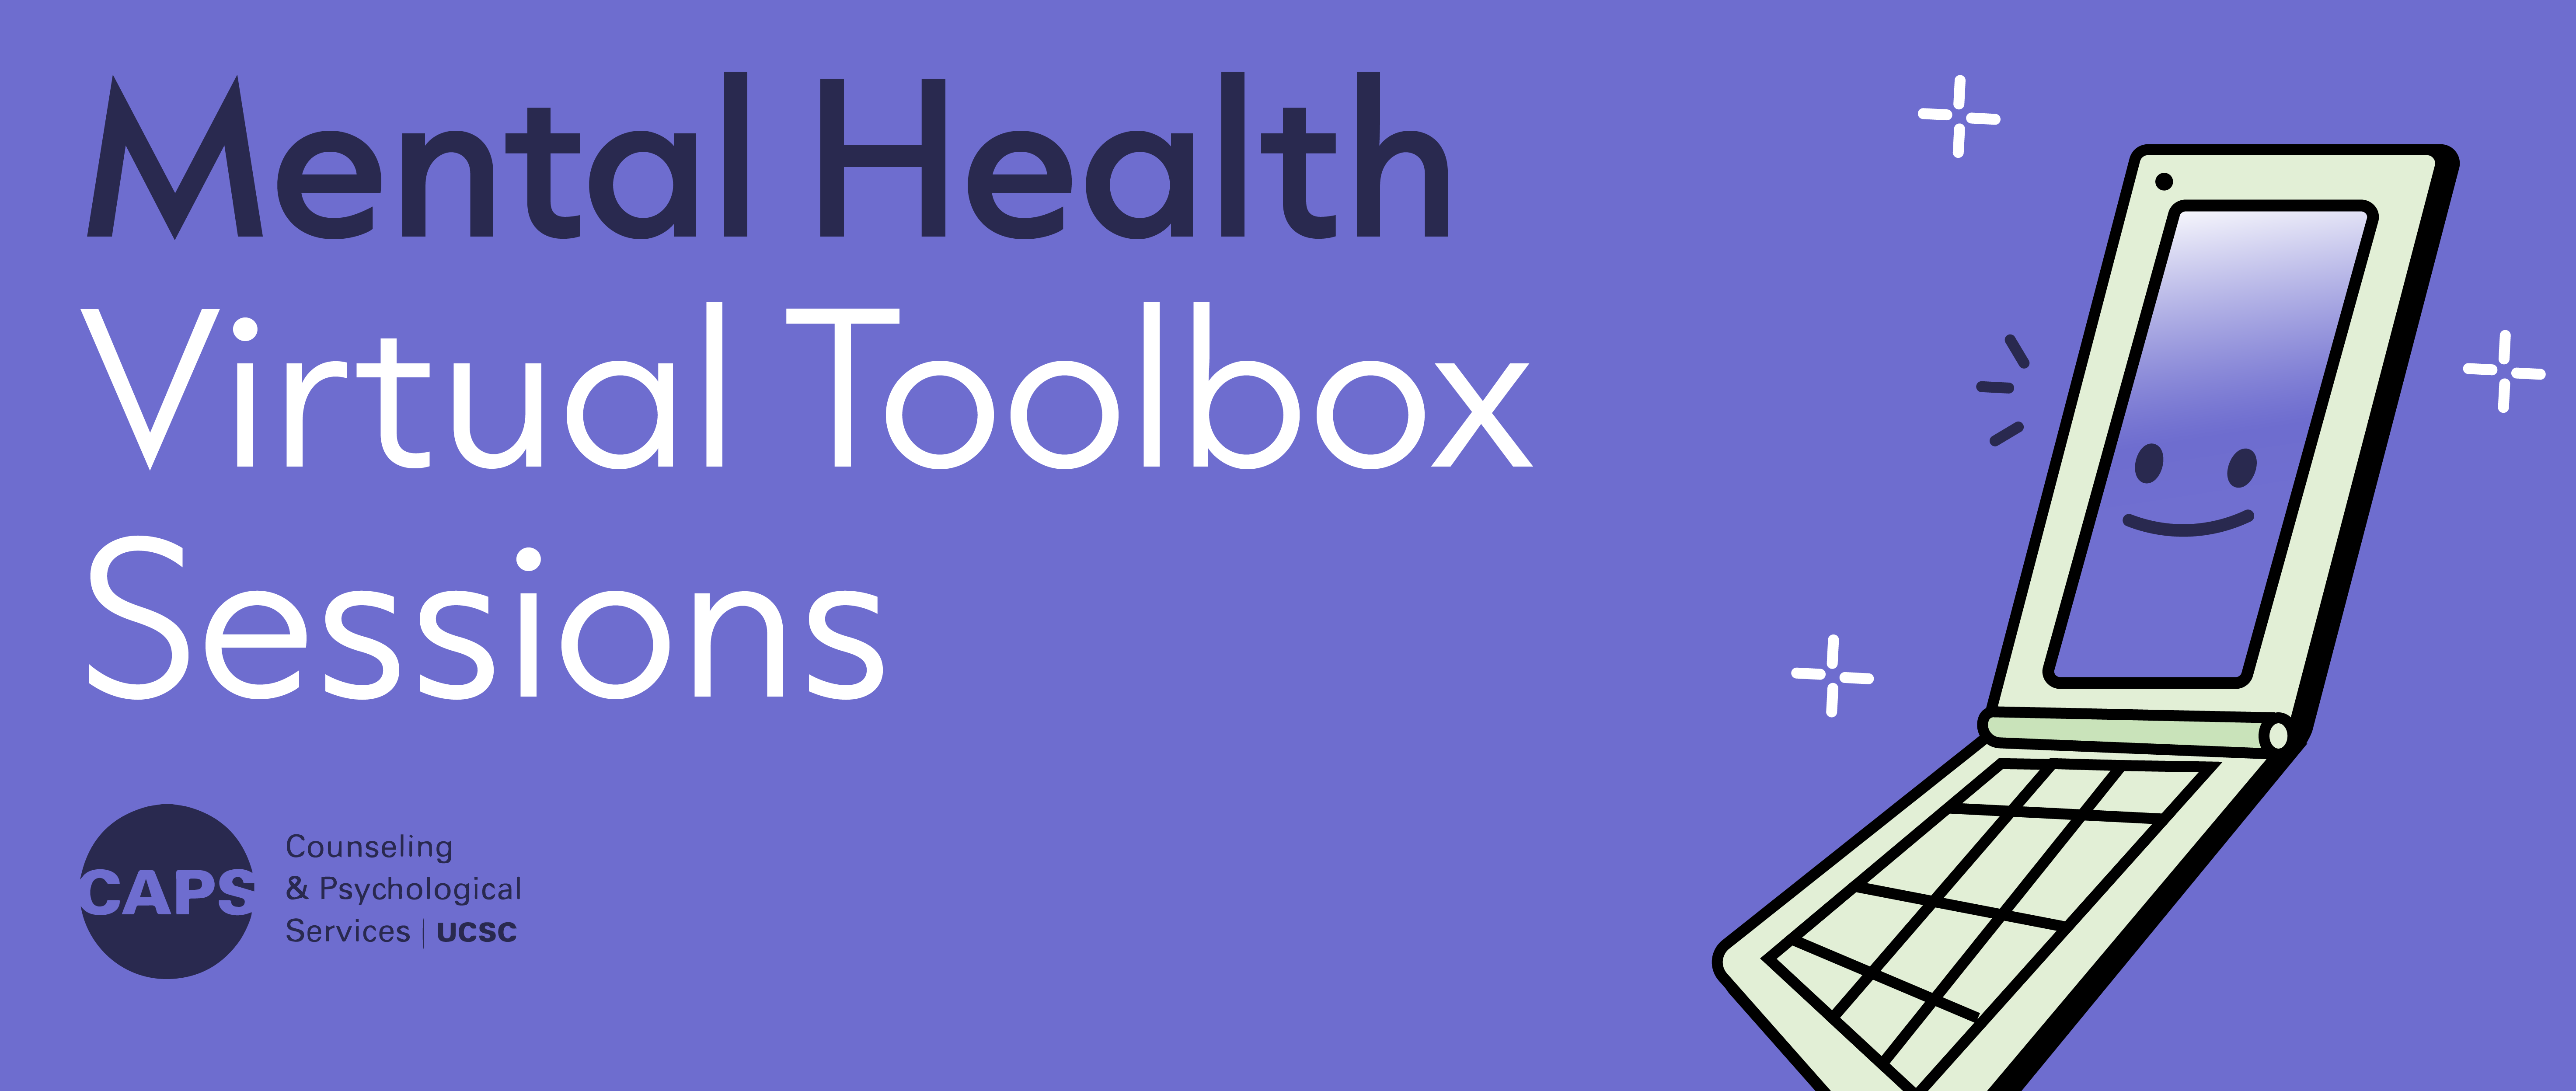 Virtual Toolbox Image of different levels of boxes